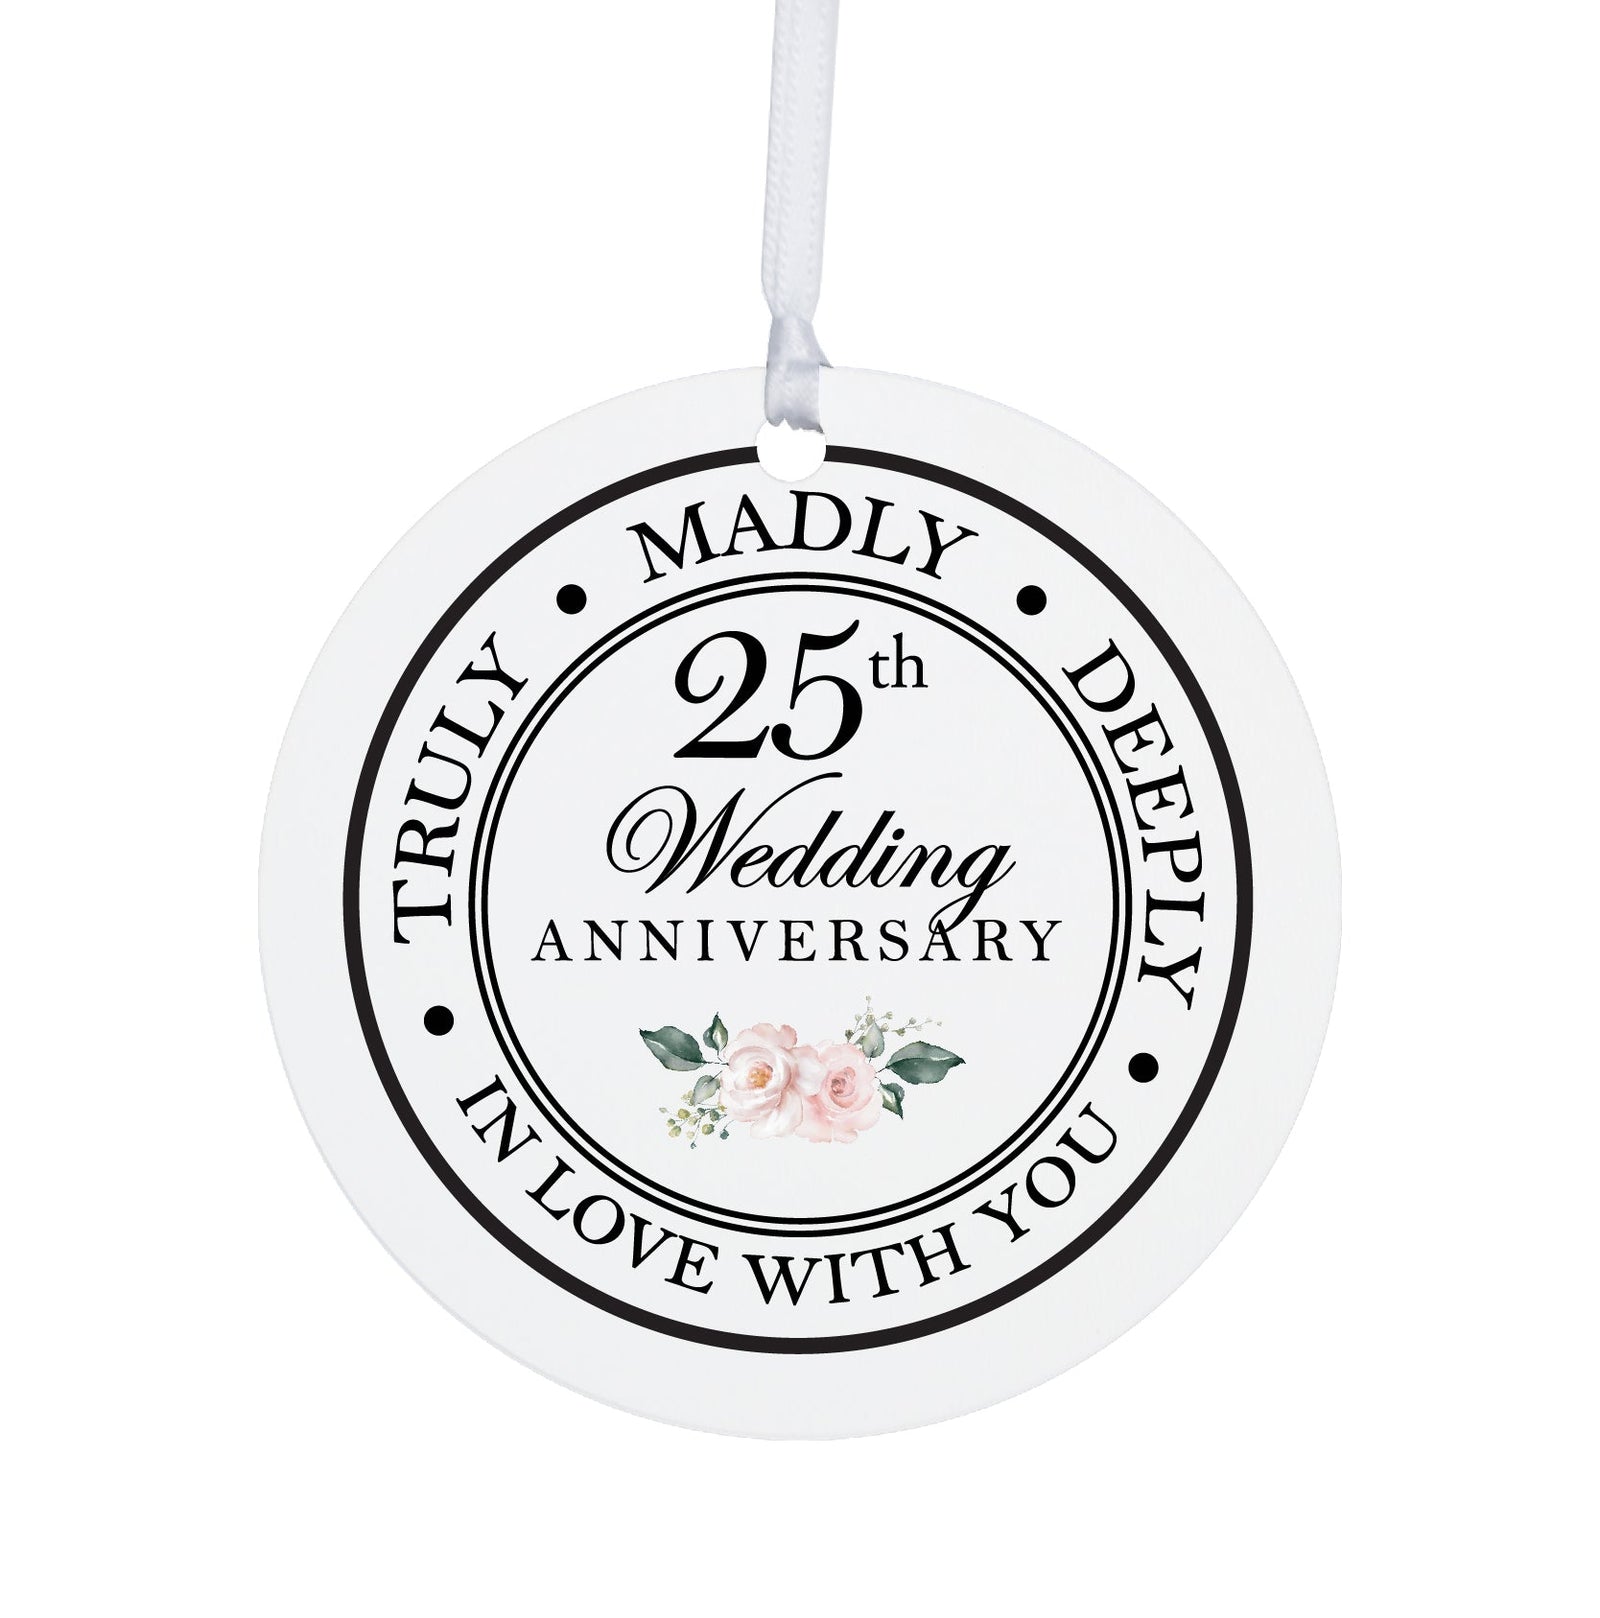 25th Wedding Anniversary White Ornament With Inspirational Message Gift Ideas - Truly, Madly, Deeply In Love With You - LifeSong Milestones